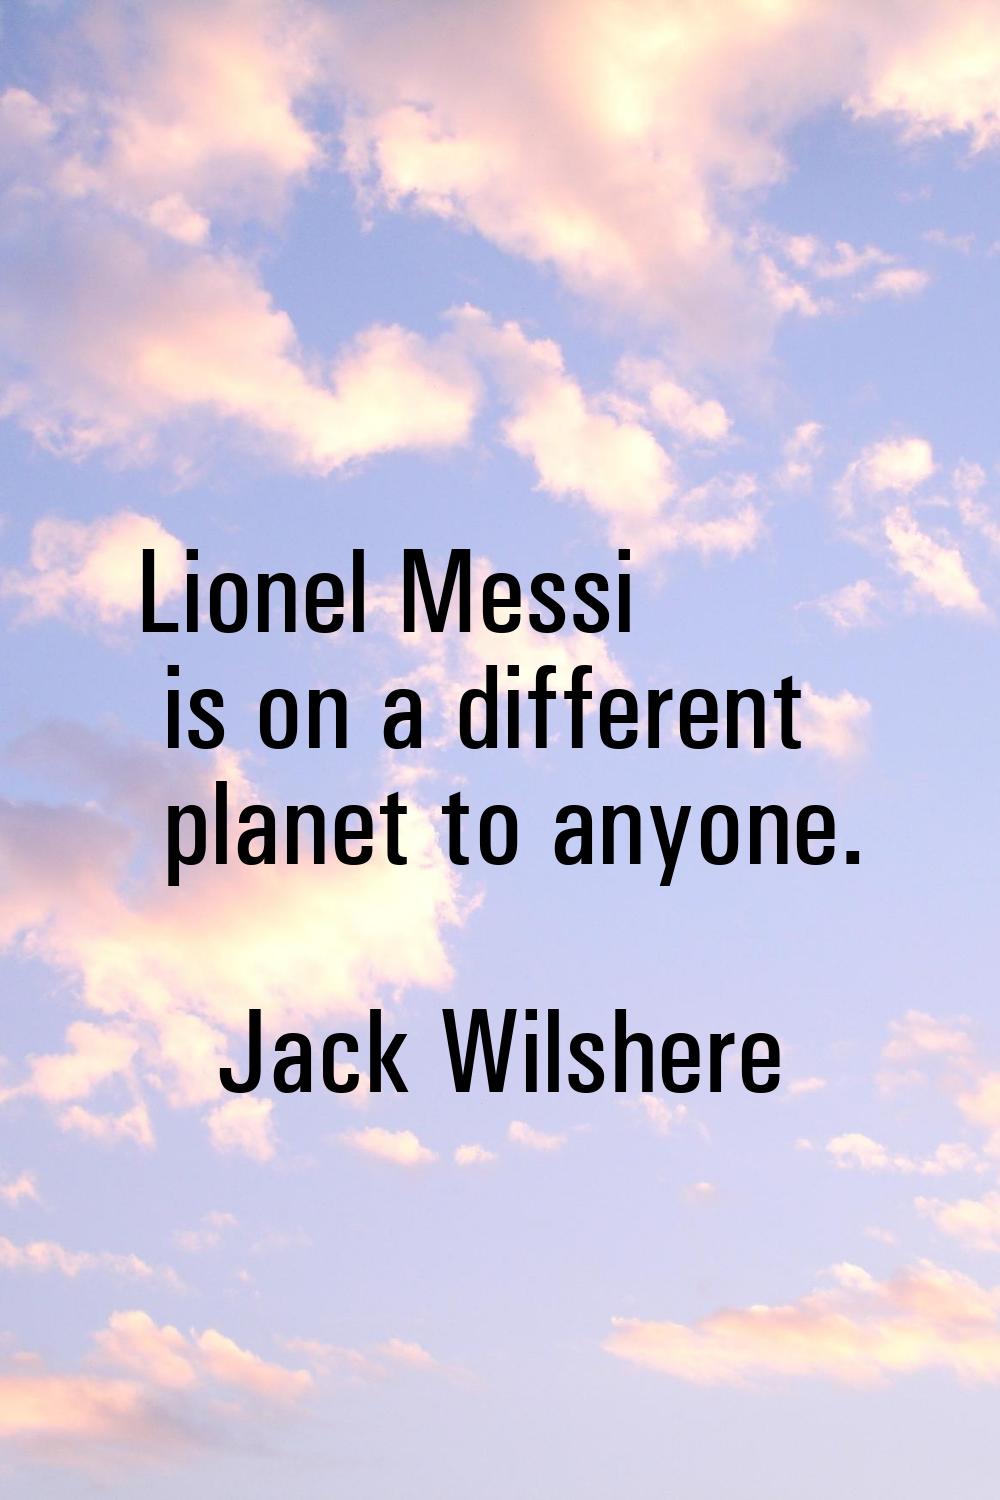 Lionel Messi is on a different planet to anyone.